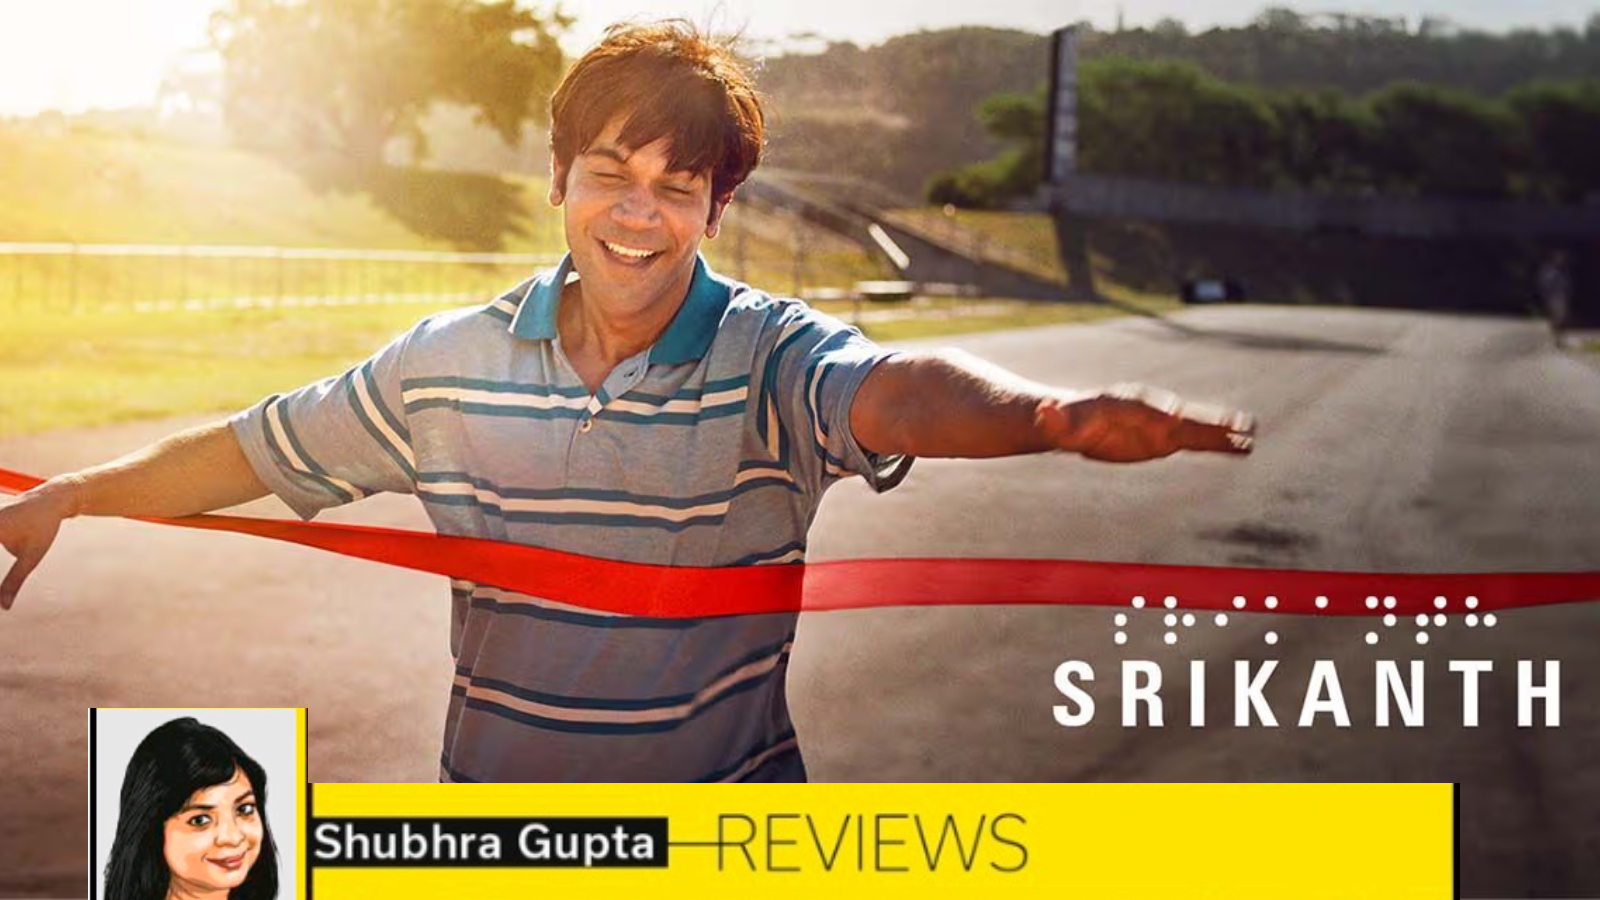 android, srikanth movie review: rajkummar rao brings skill and sincerity to this inspiring biopic